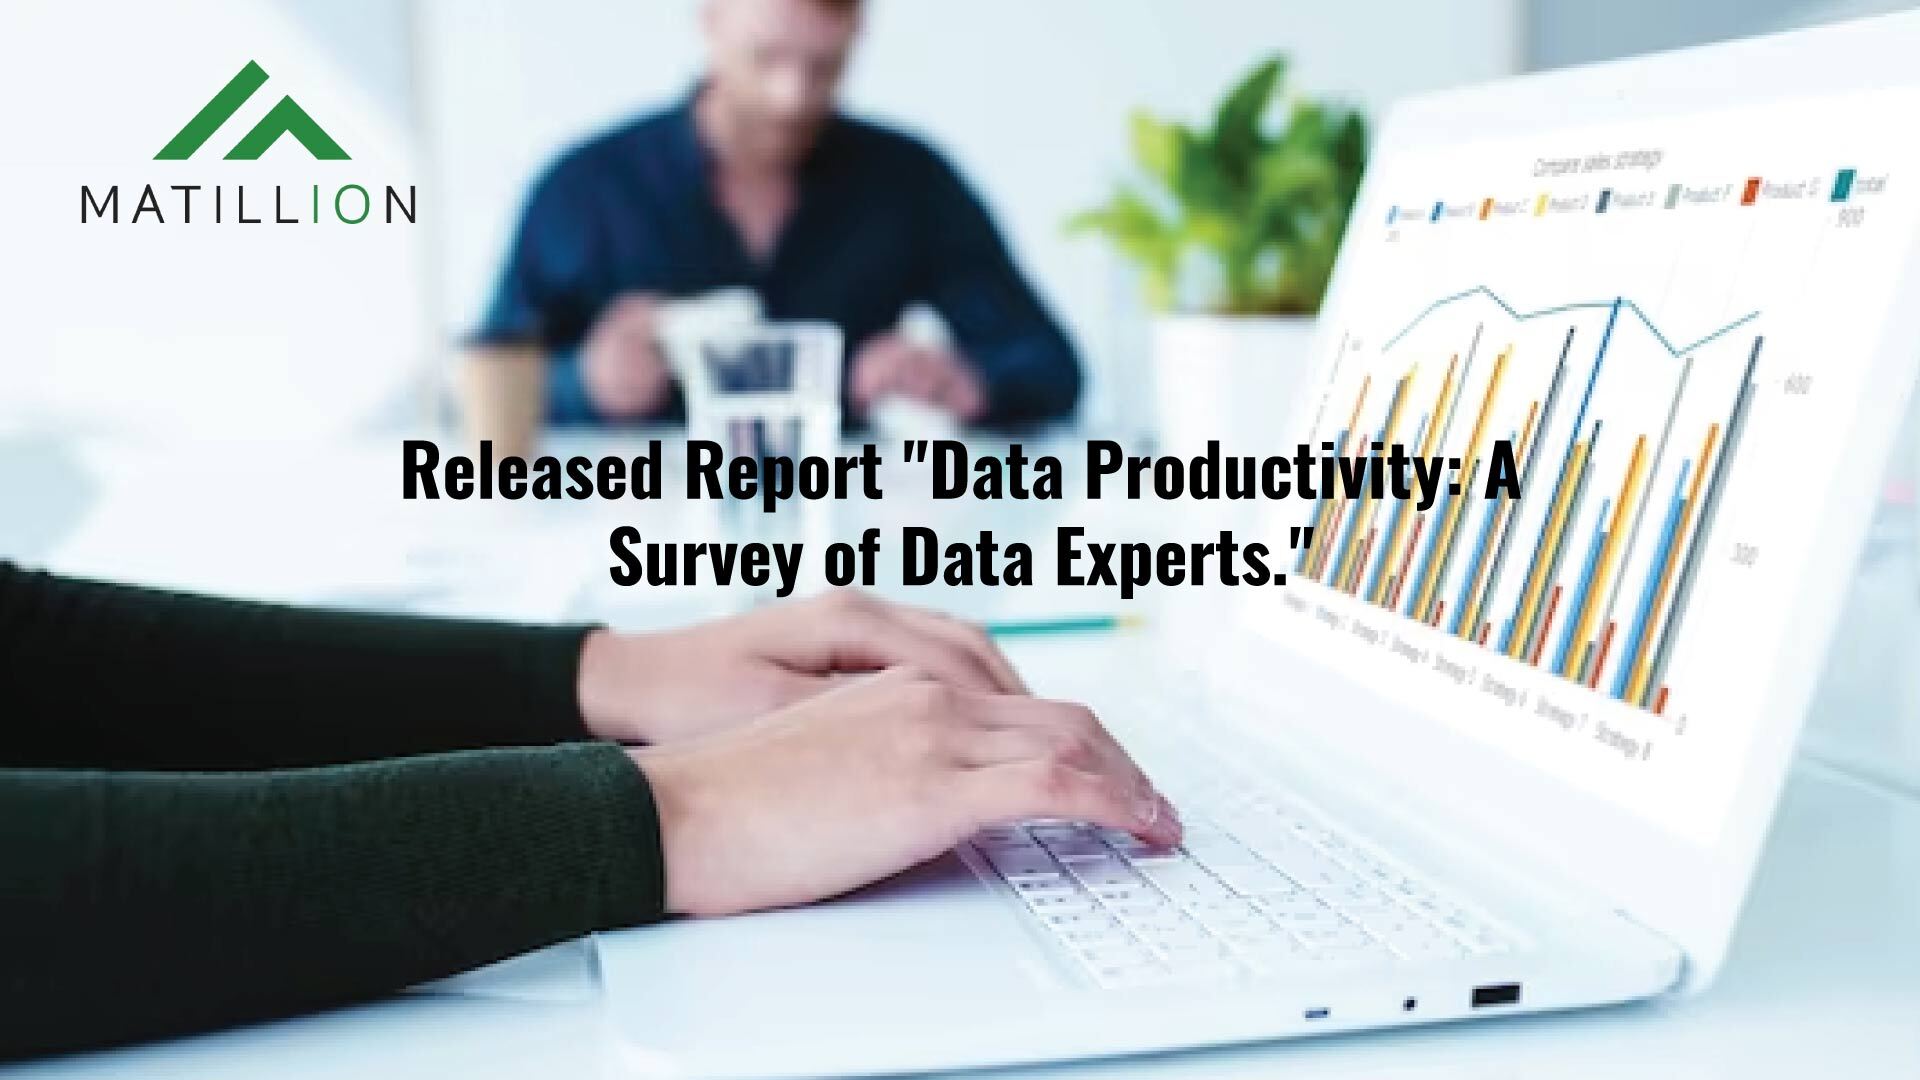 Survey: 90% of Data Experts Seek to Alleviate Workload Increases from Fragmented Pipelines and Overwhelming Business Demands